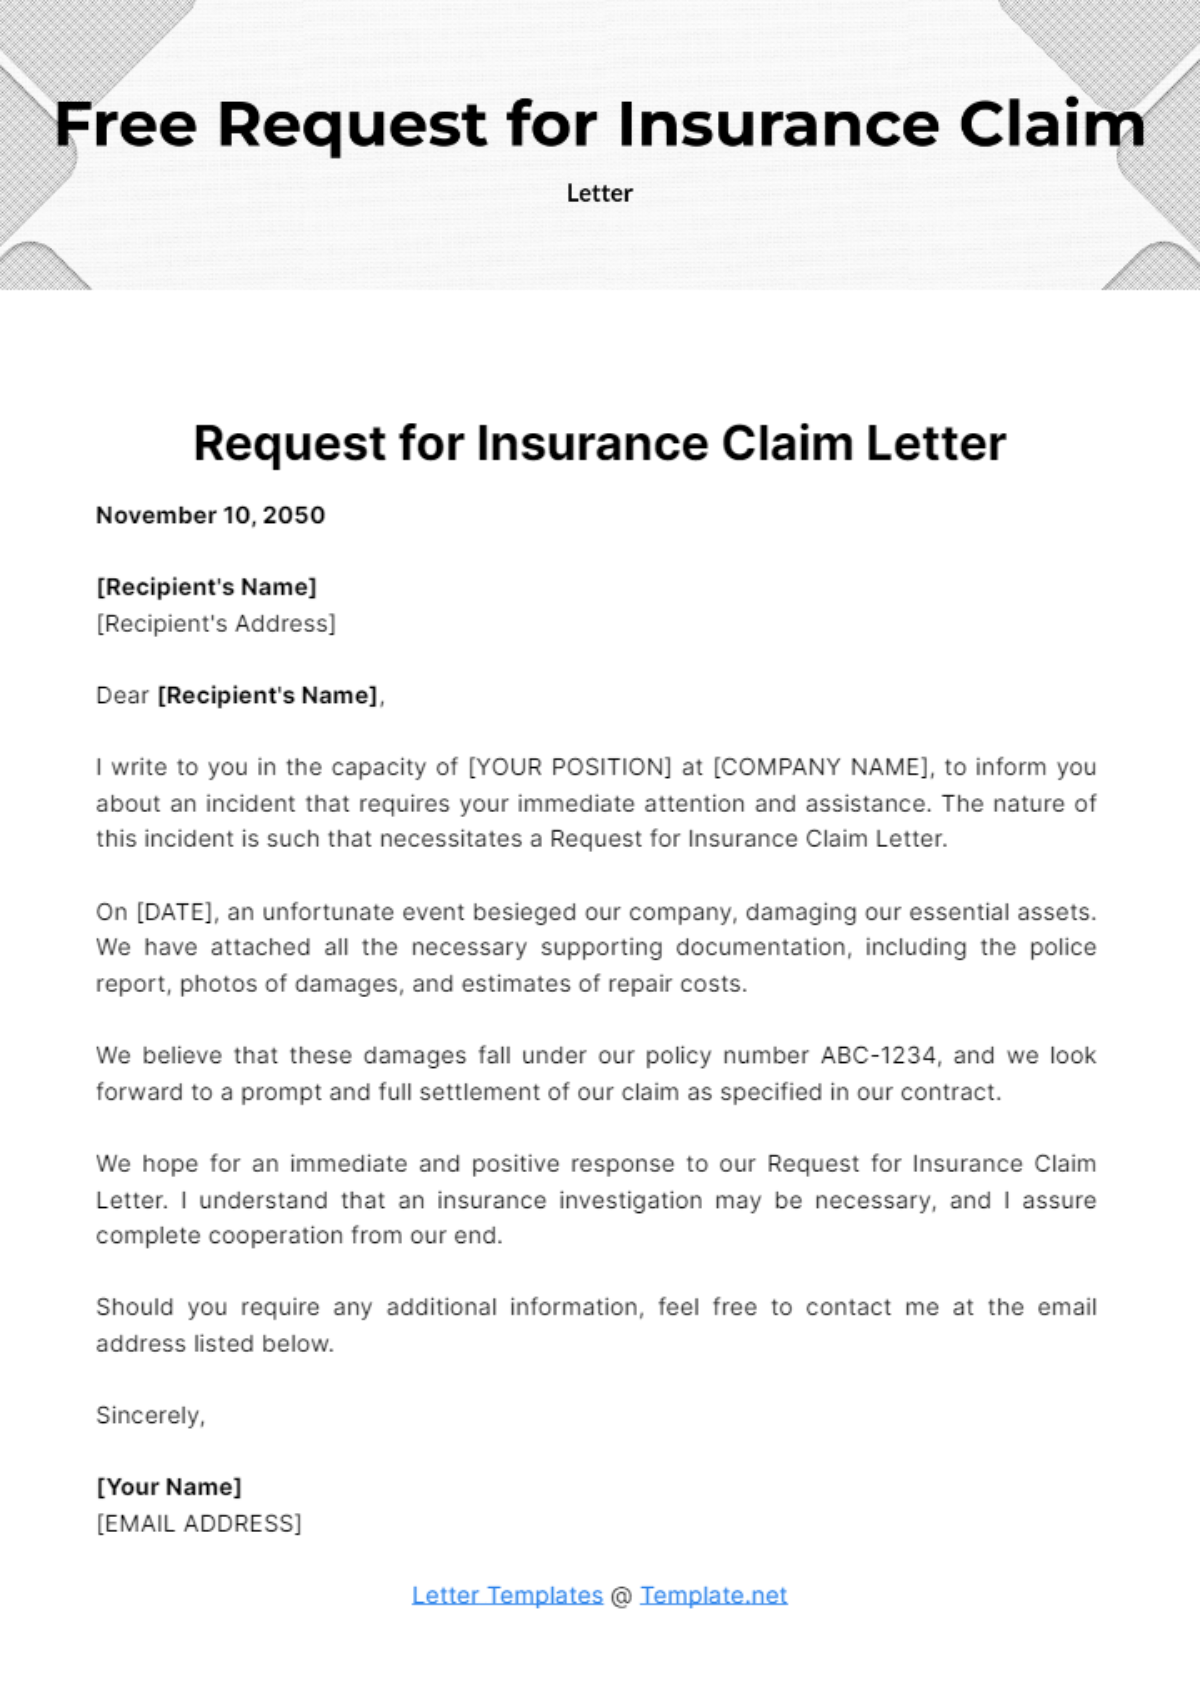 Request for Insurance Claim Letter Template